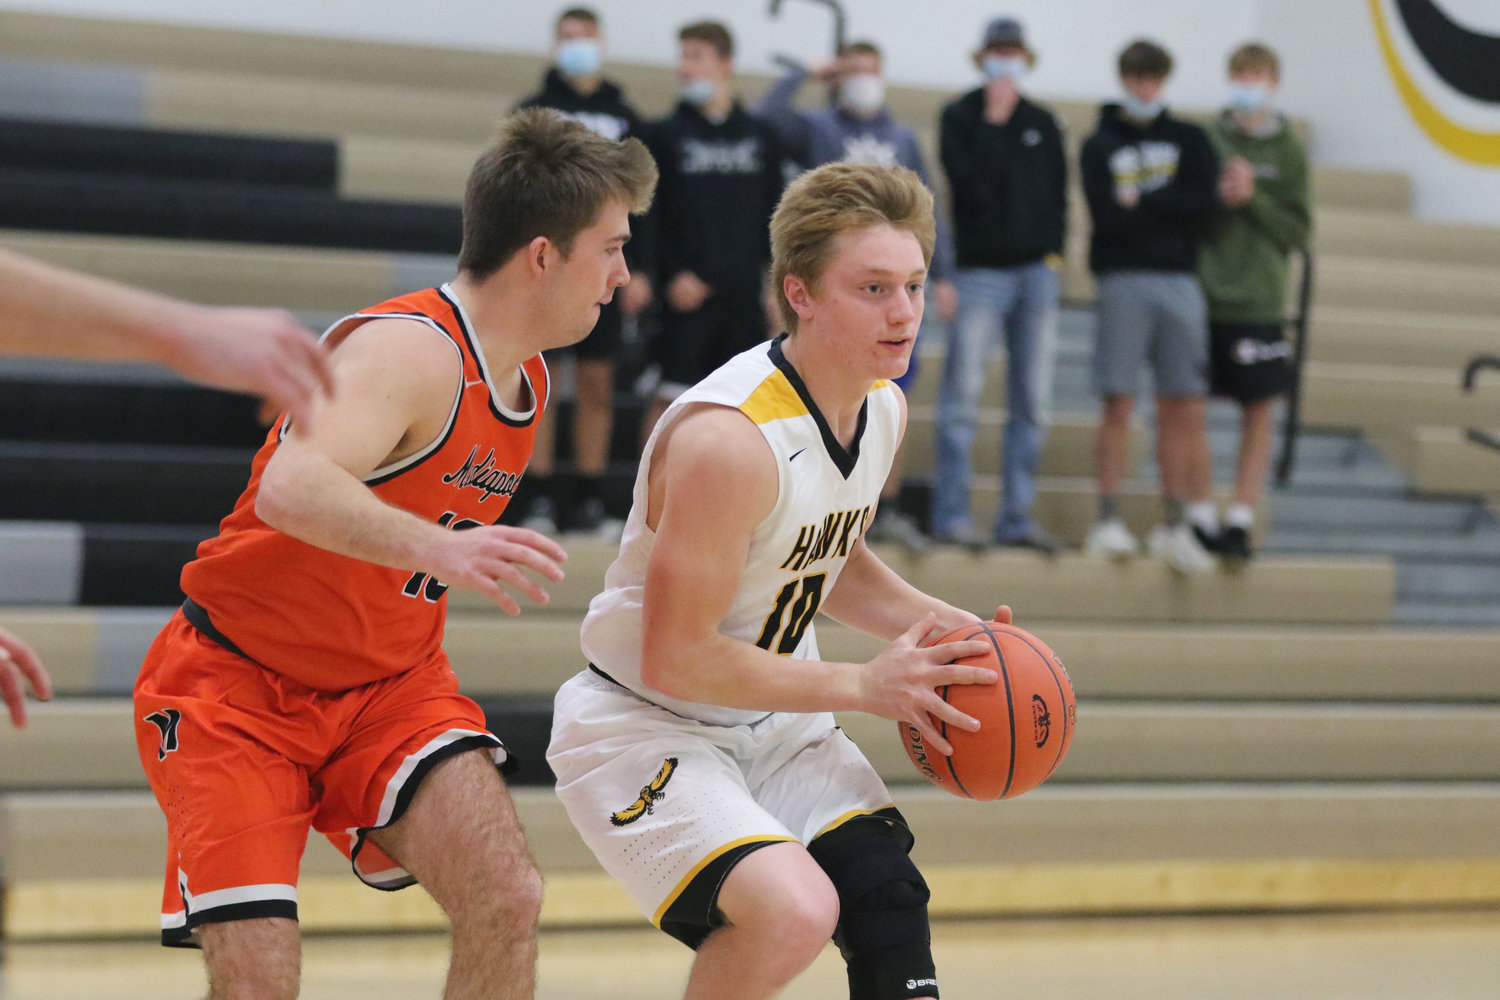 Mid-Prairie guard Luke Boyse looks for a teammate during the first quarter of a scrimmage with Mediapolis in Wellman on Saturday, November 21.